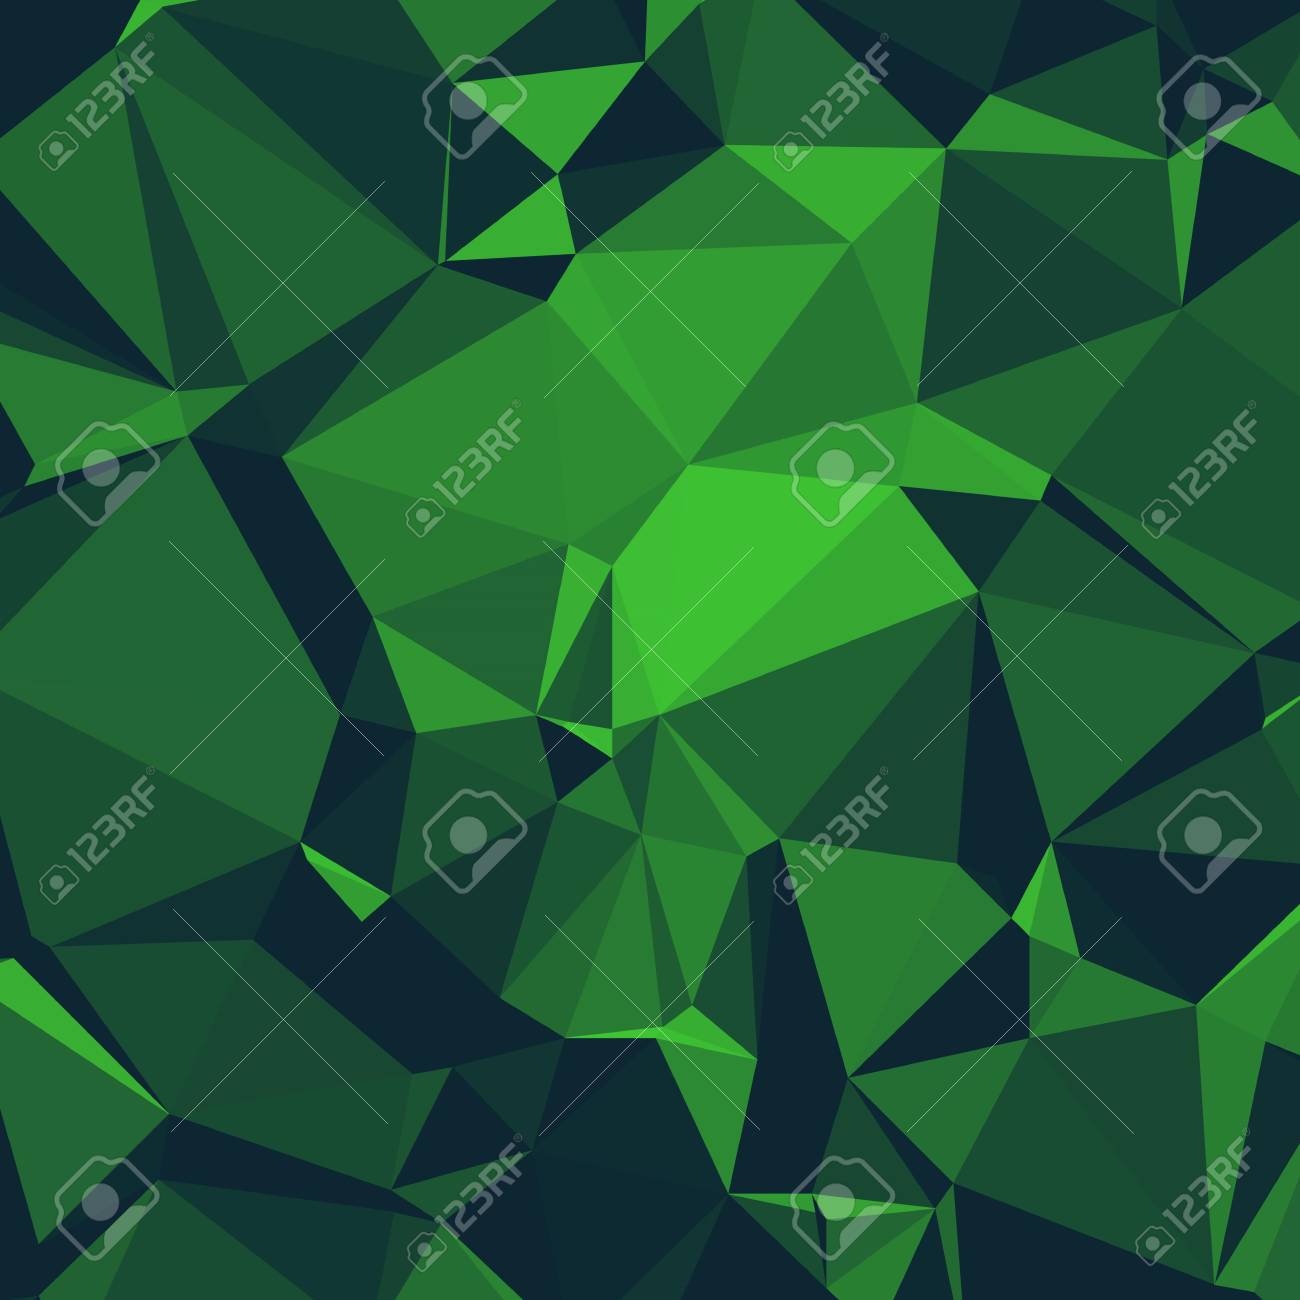 Shiny Polygonal Background In Dark Forest And Kelly Green Tones